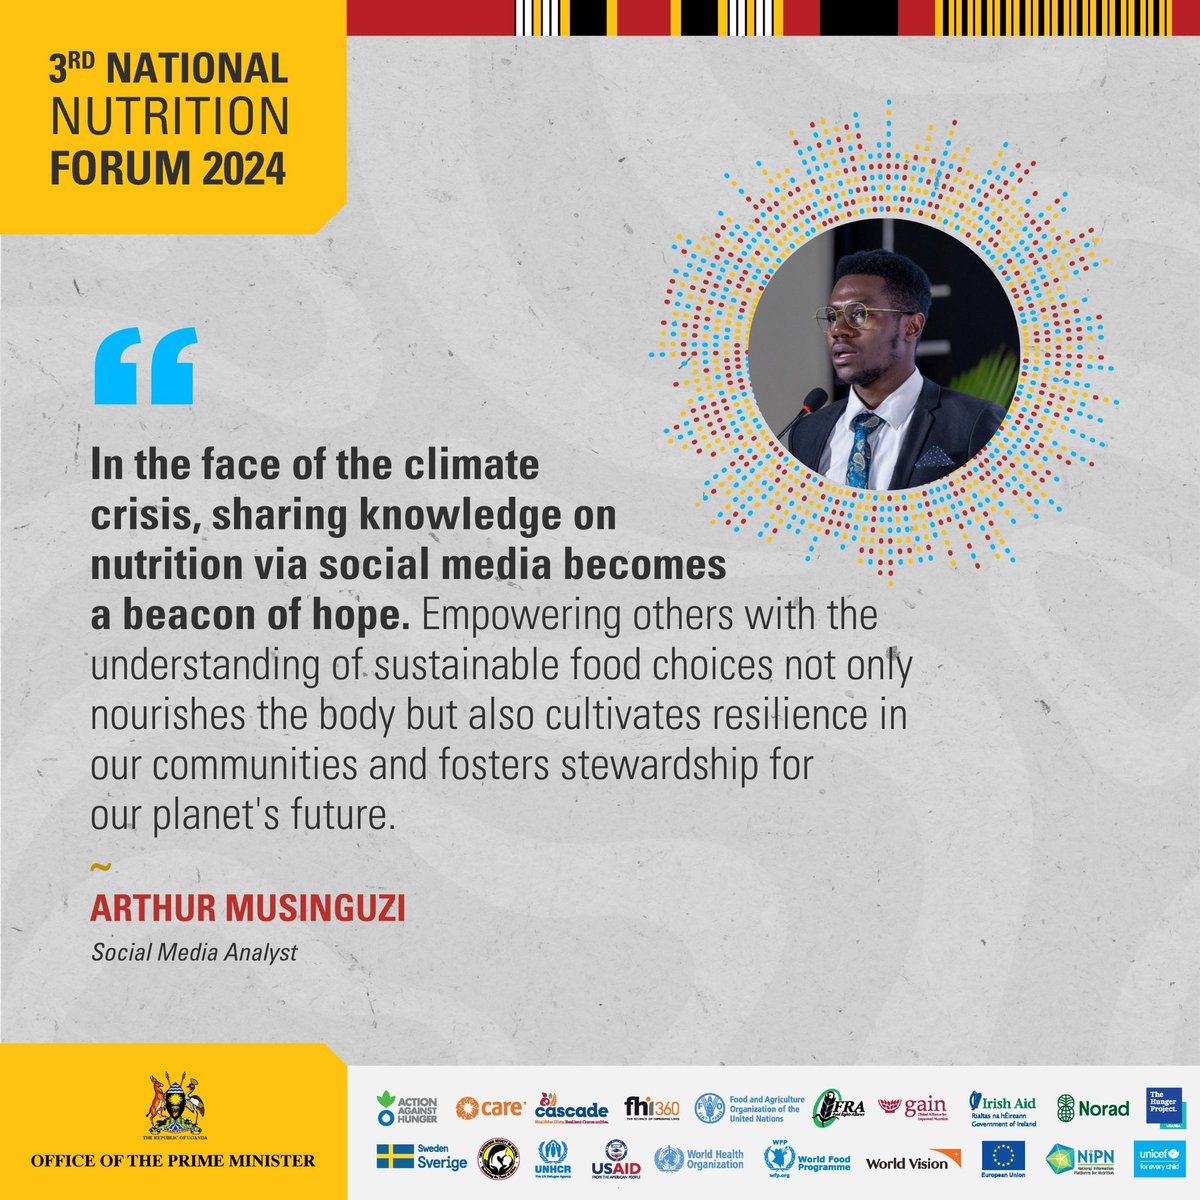 Climate activist @digitaldidan making a case for using Digital media tools to effectively implement nutrition promotion interventions. #NationalNutritionForum2024